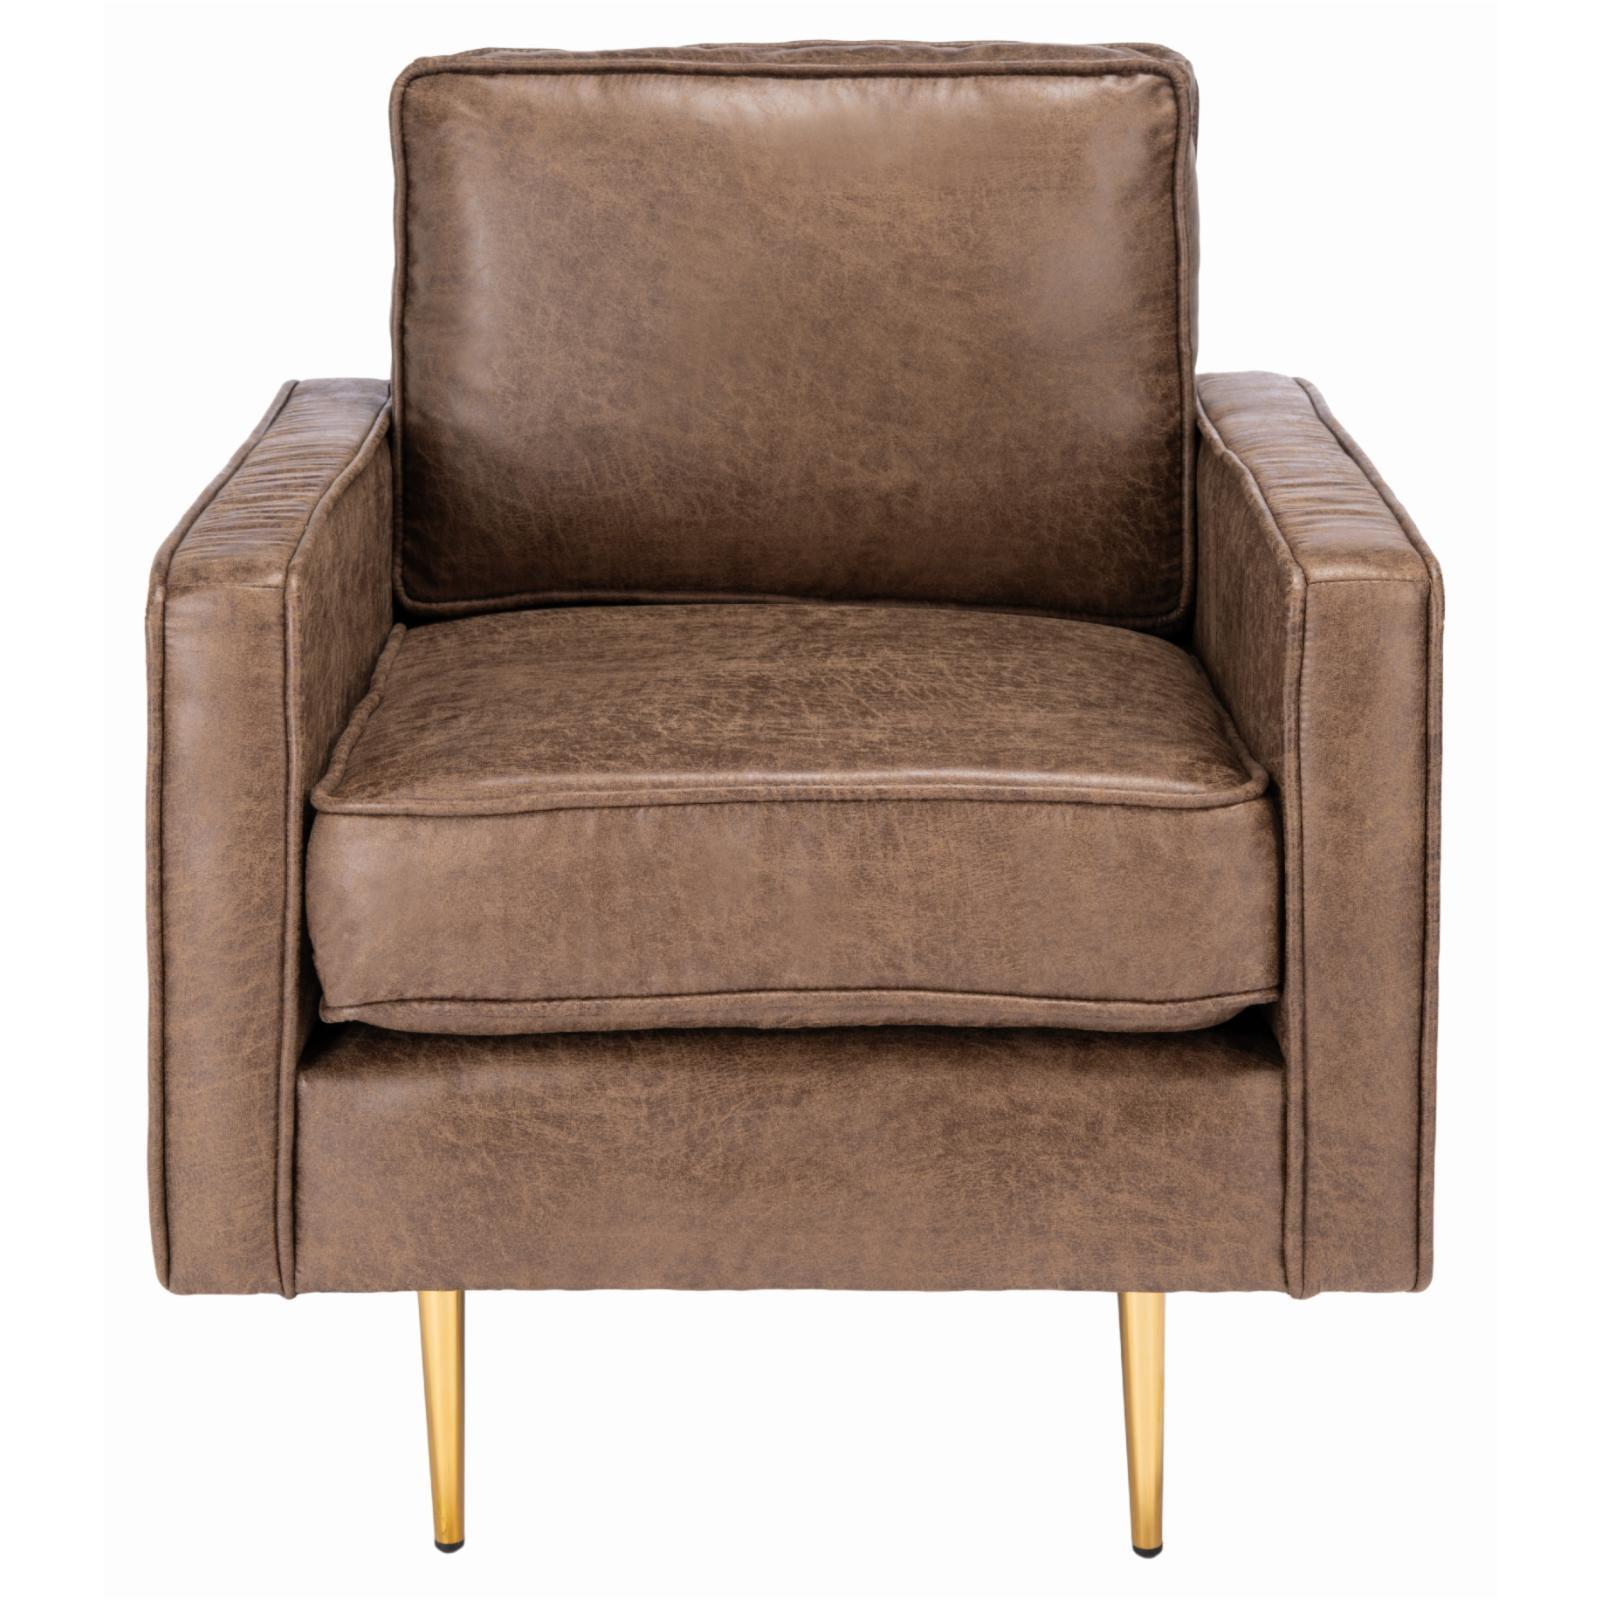 Rustic Brown Leather Accent Chair with Gold Metal Legs